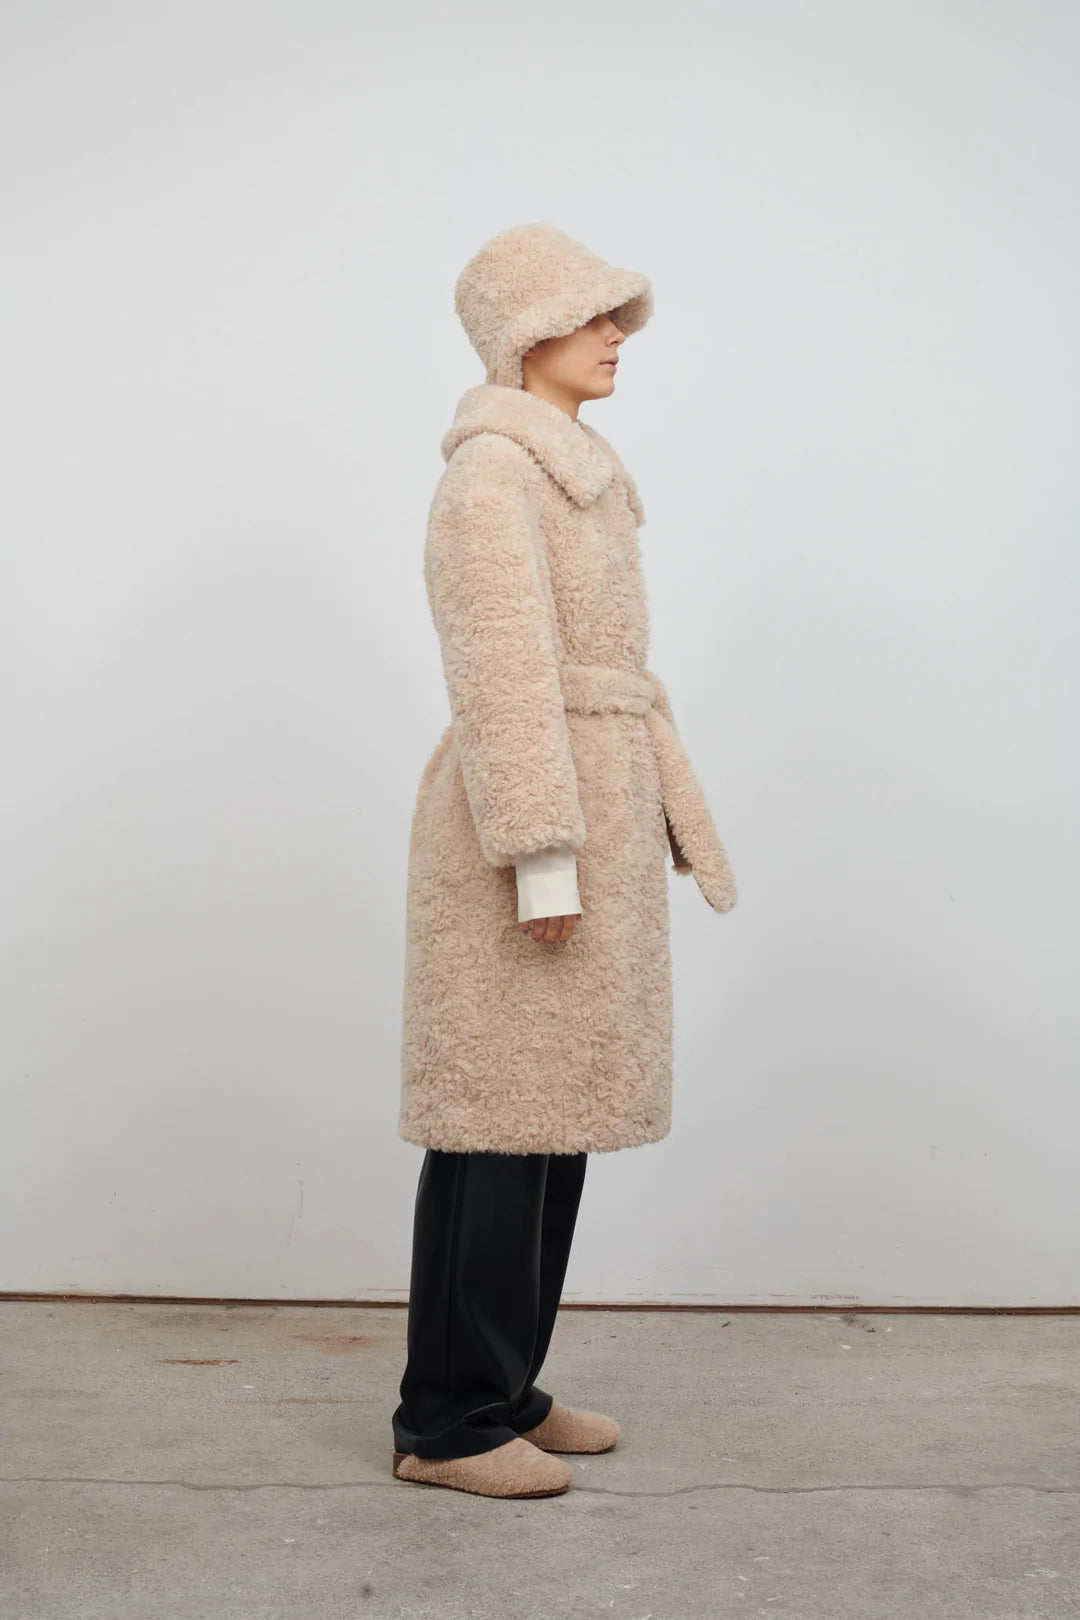 Midi length faux fur coat with large collar V neck and three popper fastenings